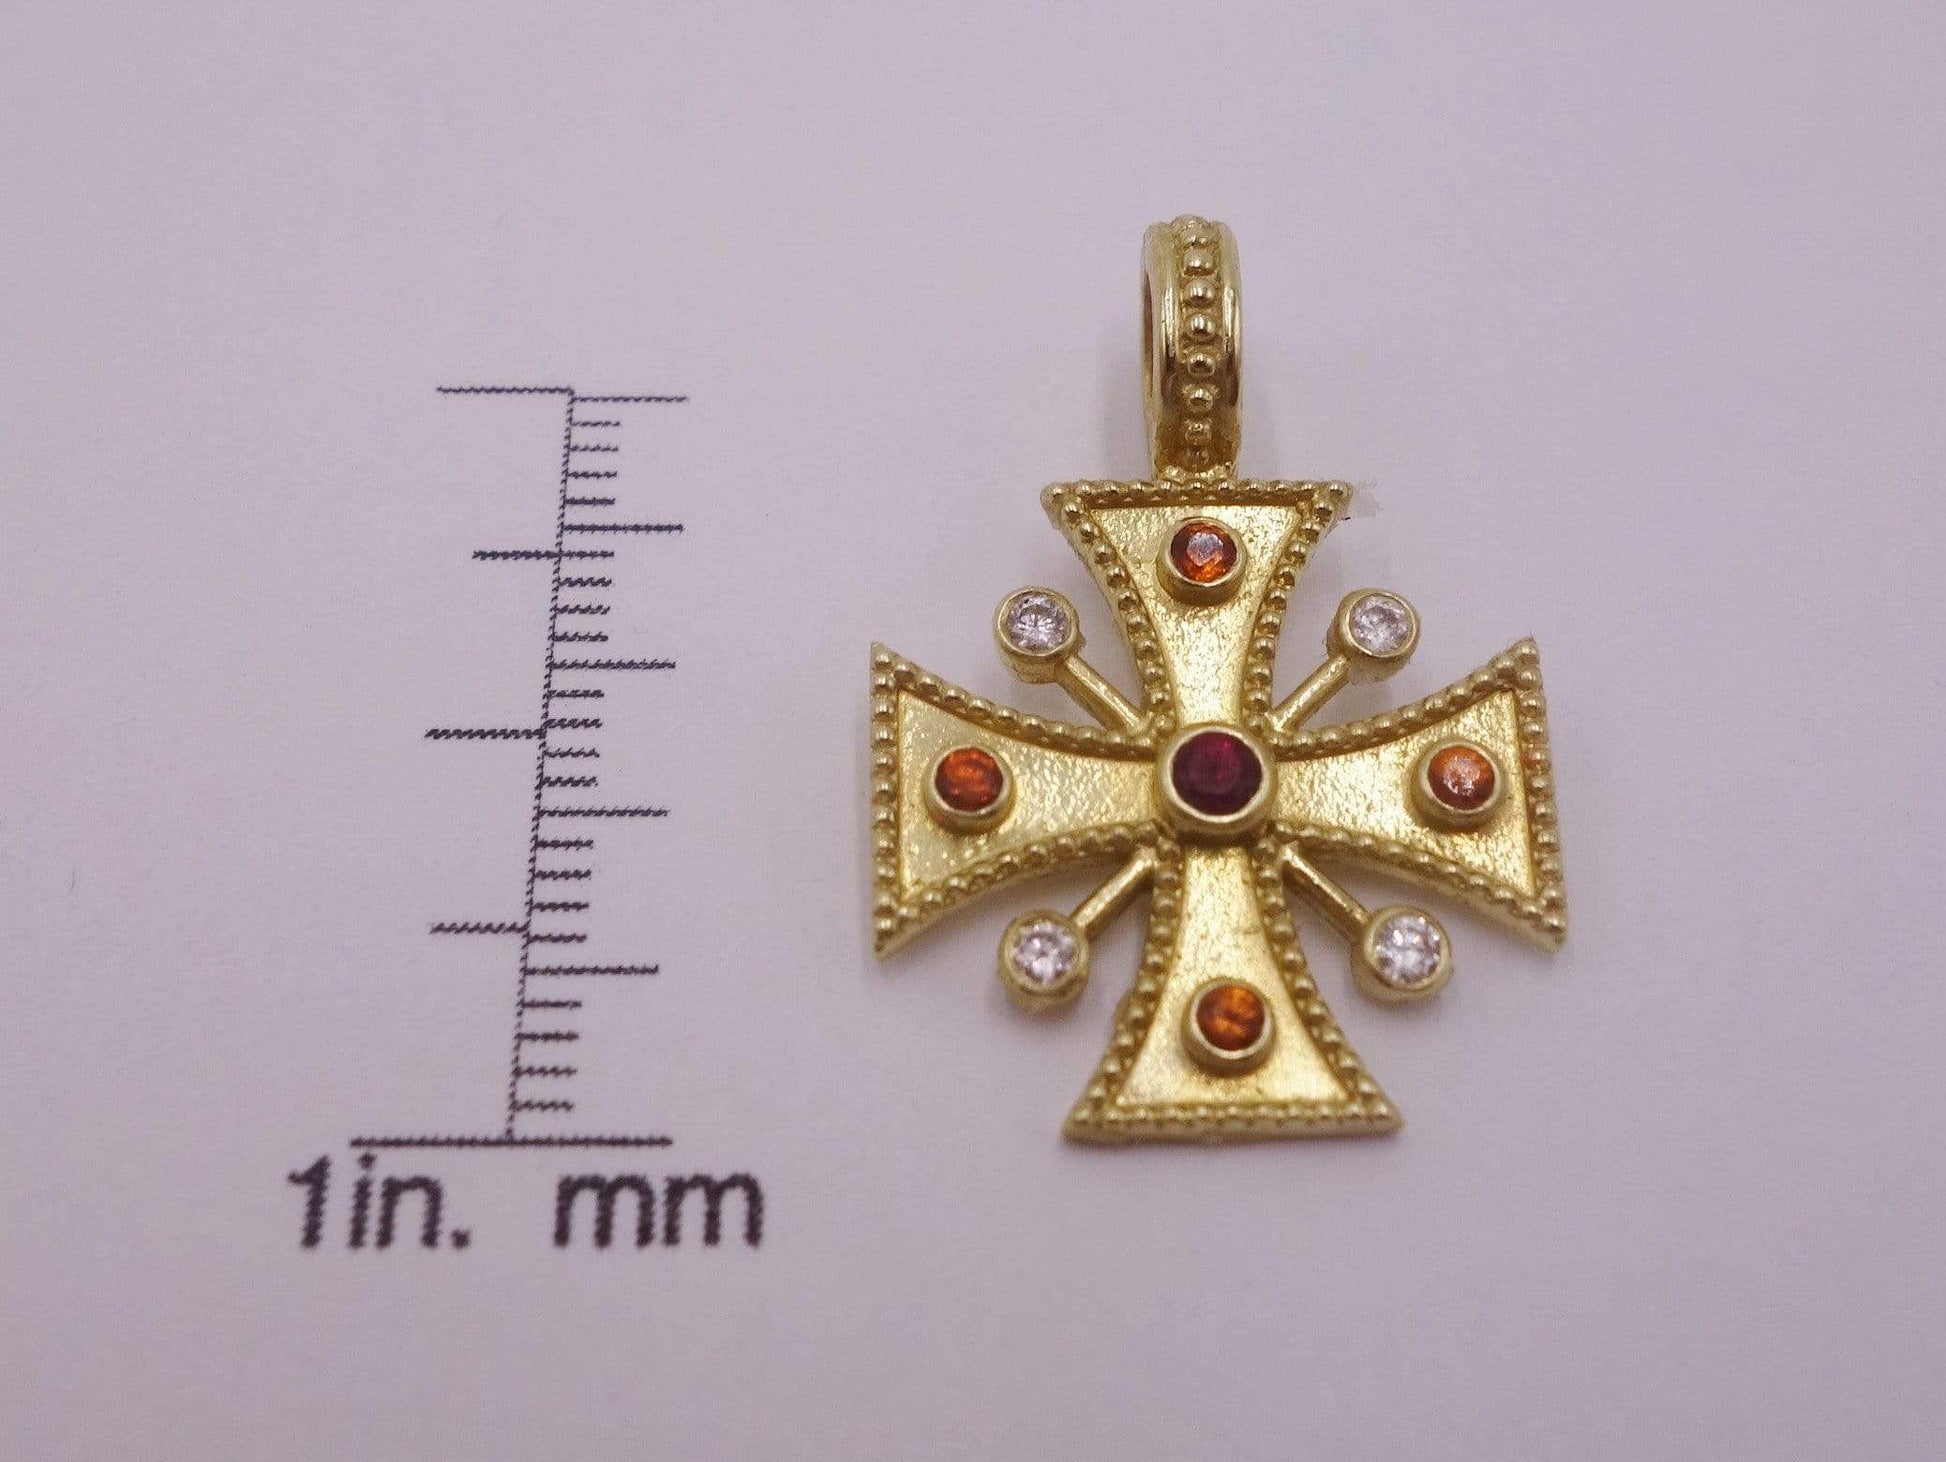 Gold Cross necklace pendant with diamonds, sapphires and a ruby